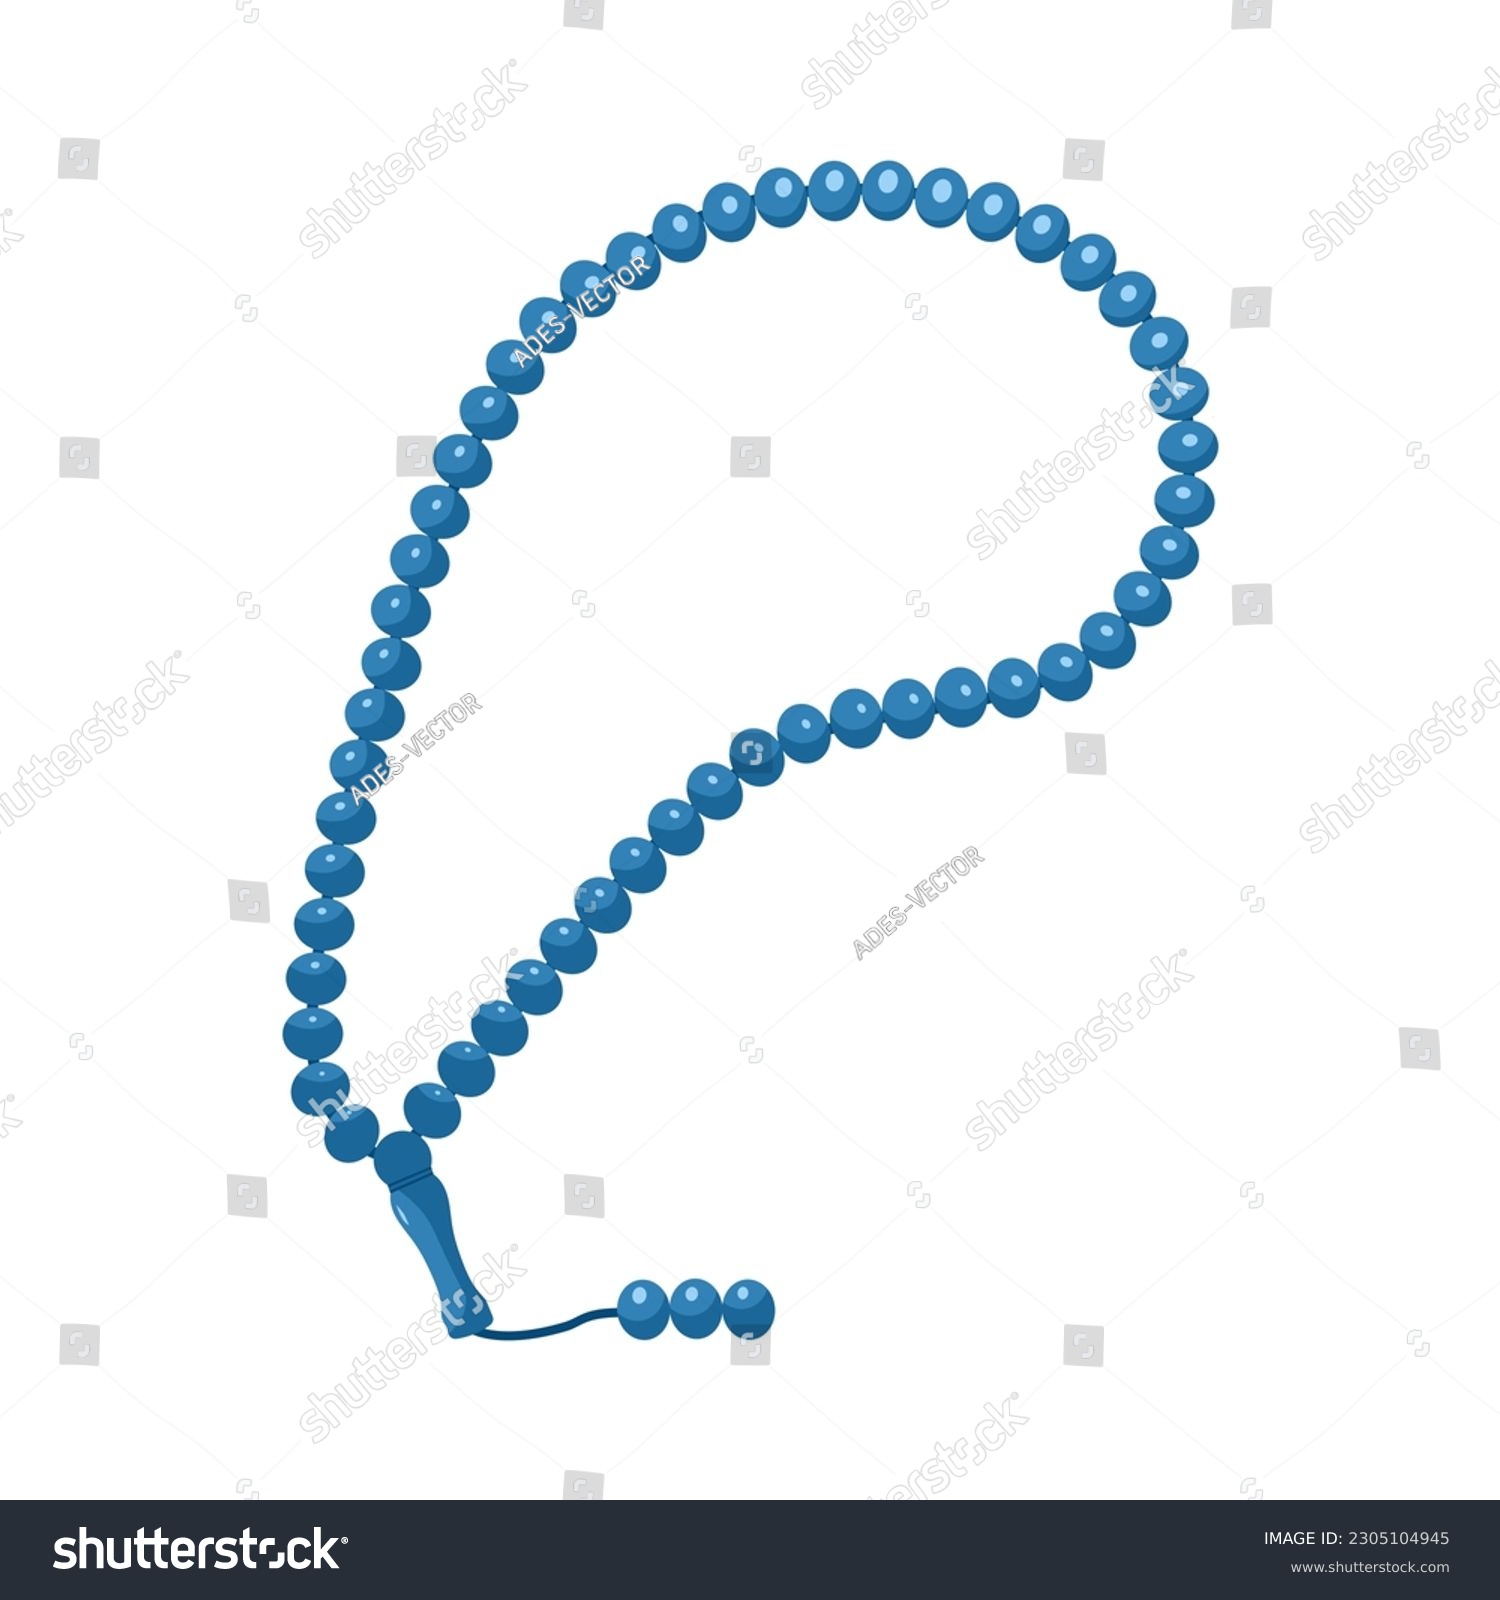 SVG of Blue prayer beads made of stone, isolated on a white background, vector illustration, prayer beads standing svg